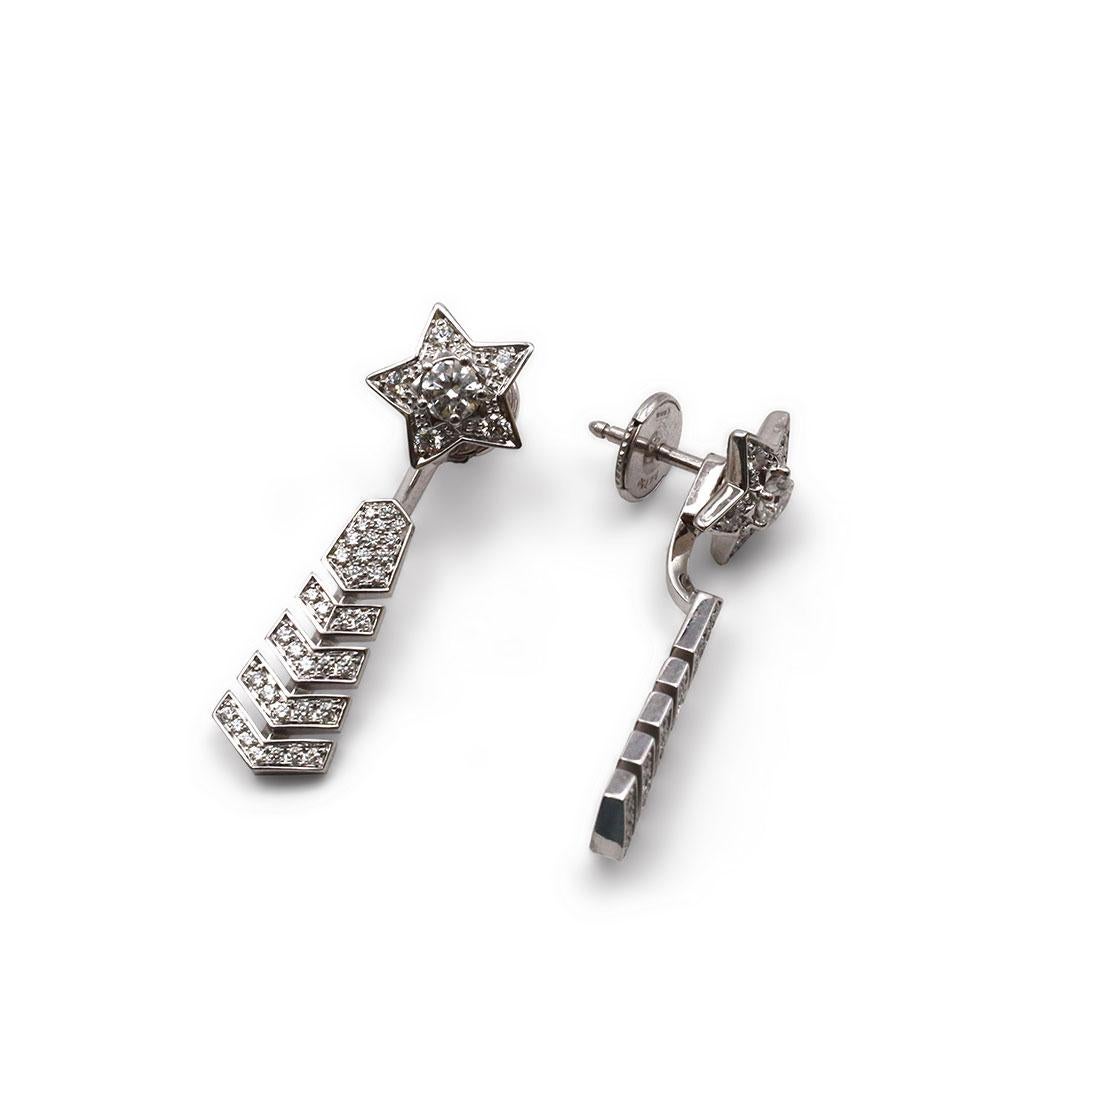 Authentic Chanel Cométe Chevron jacket earrings crafted in 18 karat white gold are comprised of two sections that are removable. The earrings can be worn with the long chevron jacket attached behind the lobe or as simple star ear-studs. These